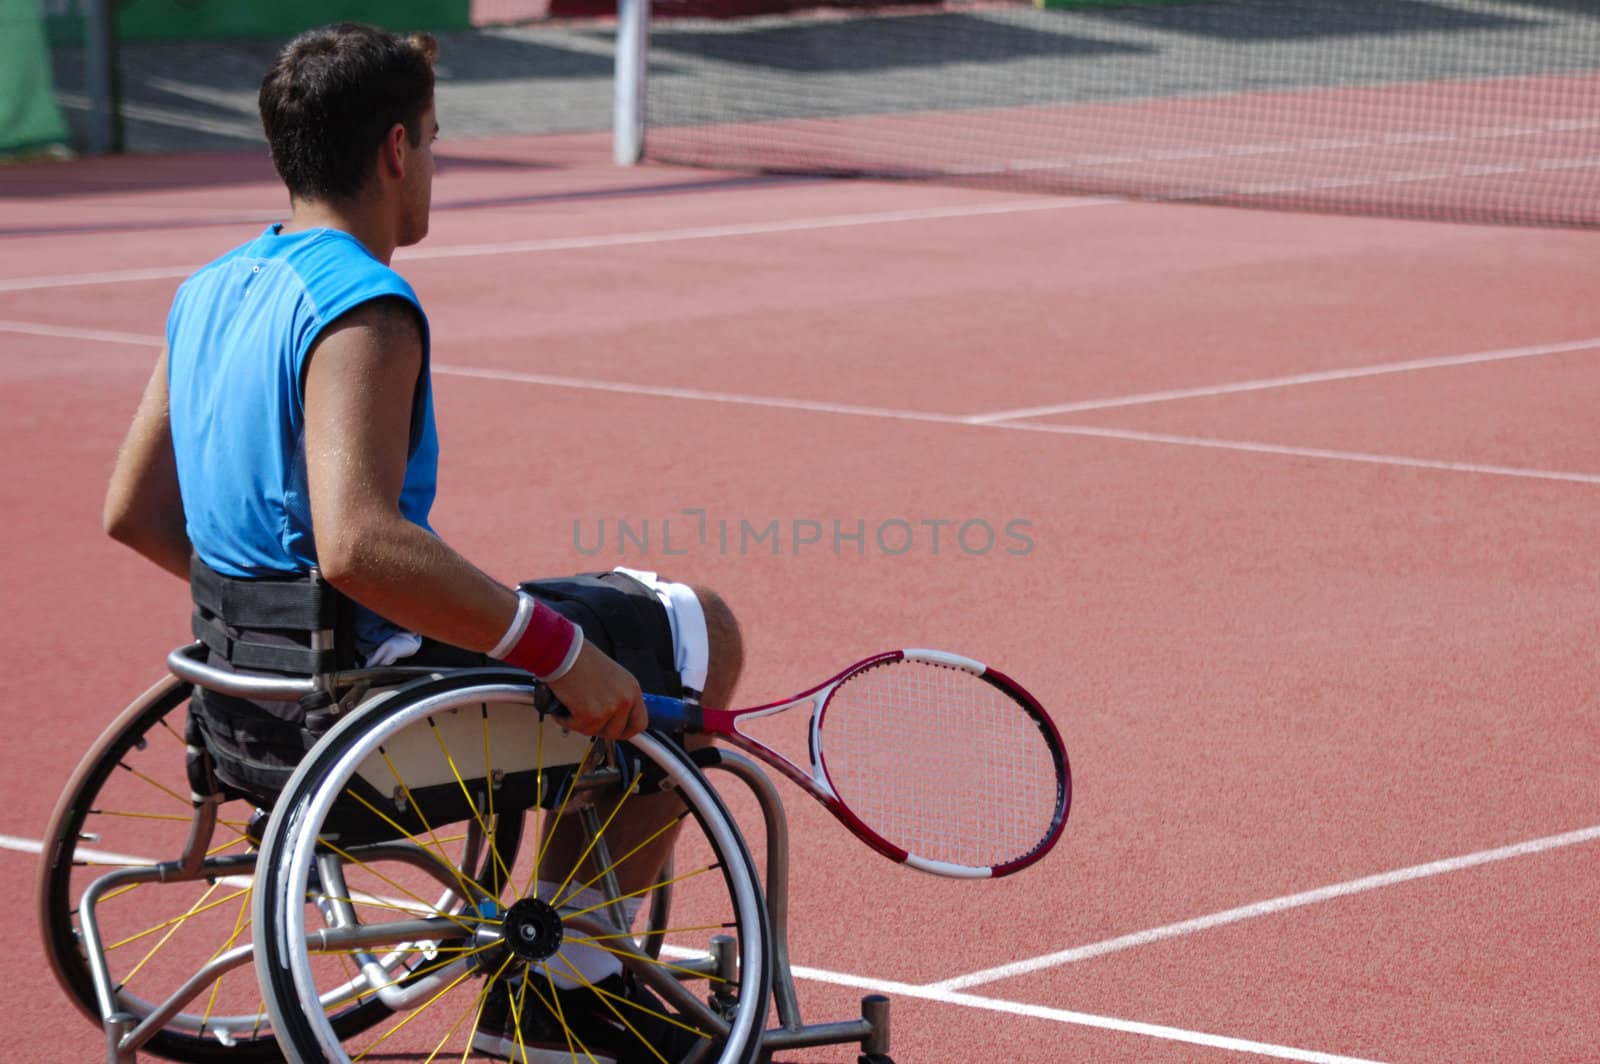 A wheelchair tennis player during a tennis championship match, waiting to take a shot. Space for text.